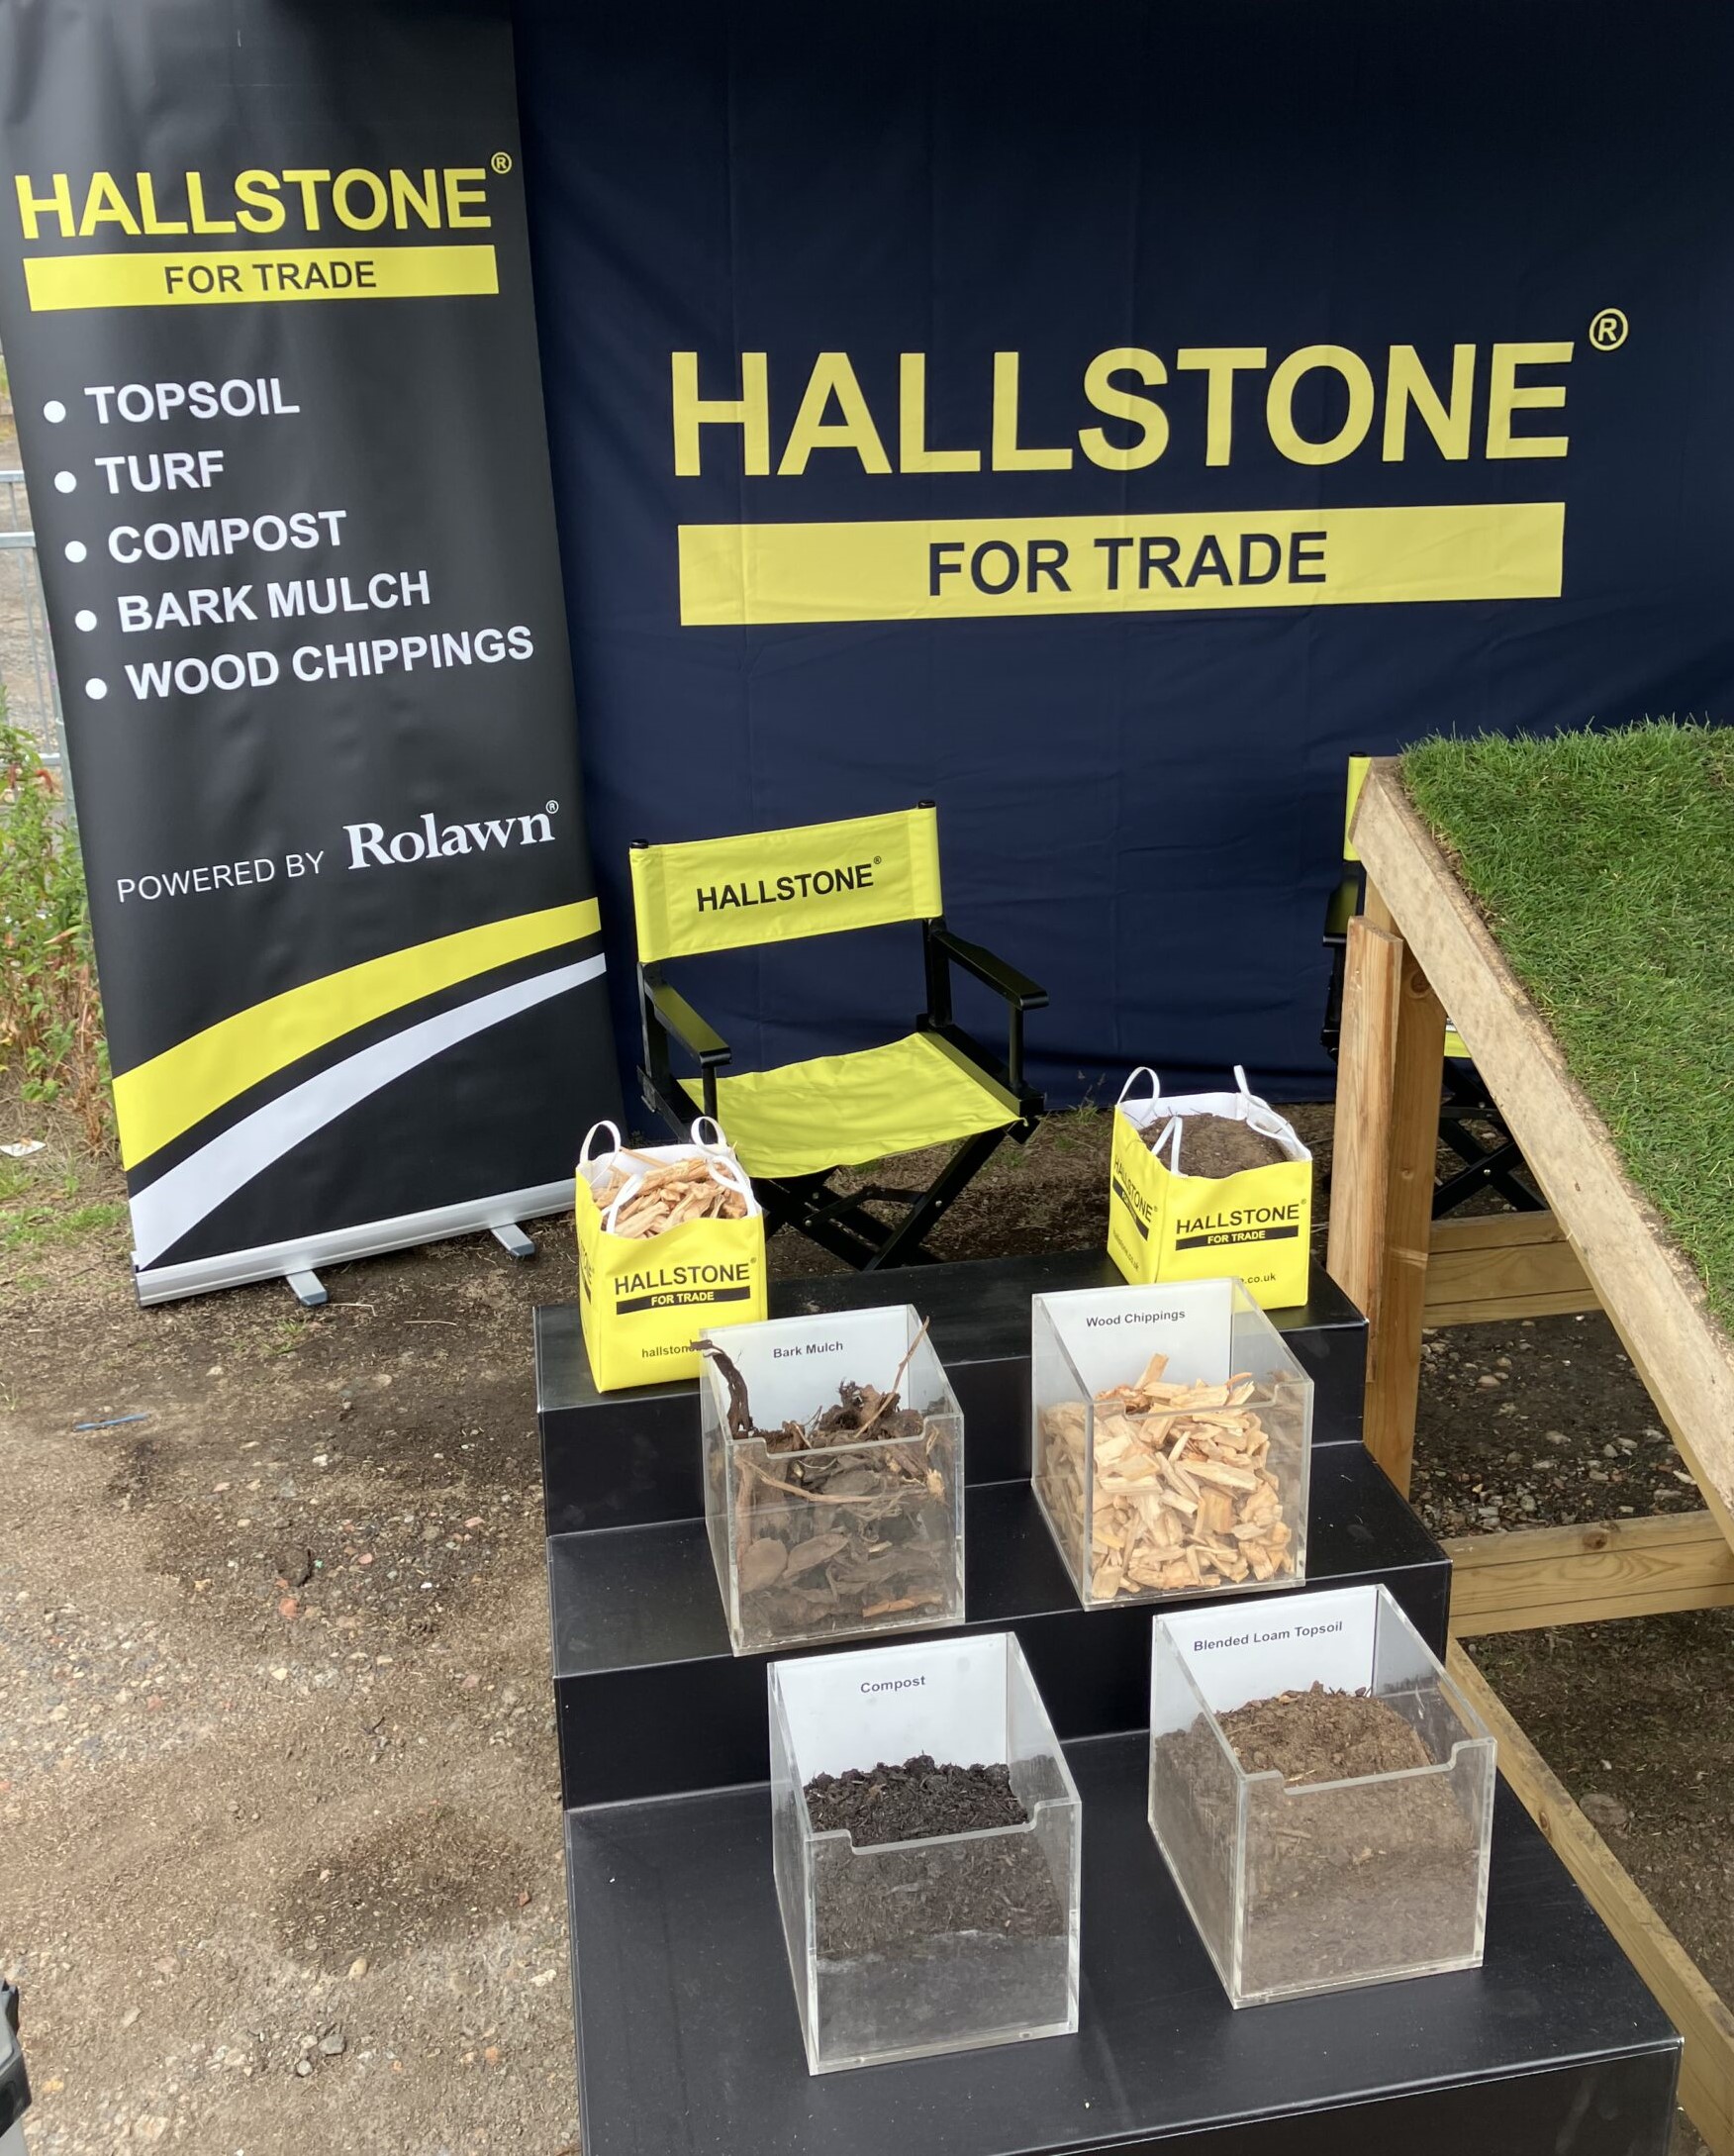 Hallstone has taken steps to “more effectively support the industry” with a newly-launched trade-only offering of topsoil, mulch, wood chippings, compost and turf.